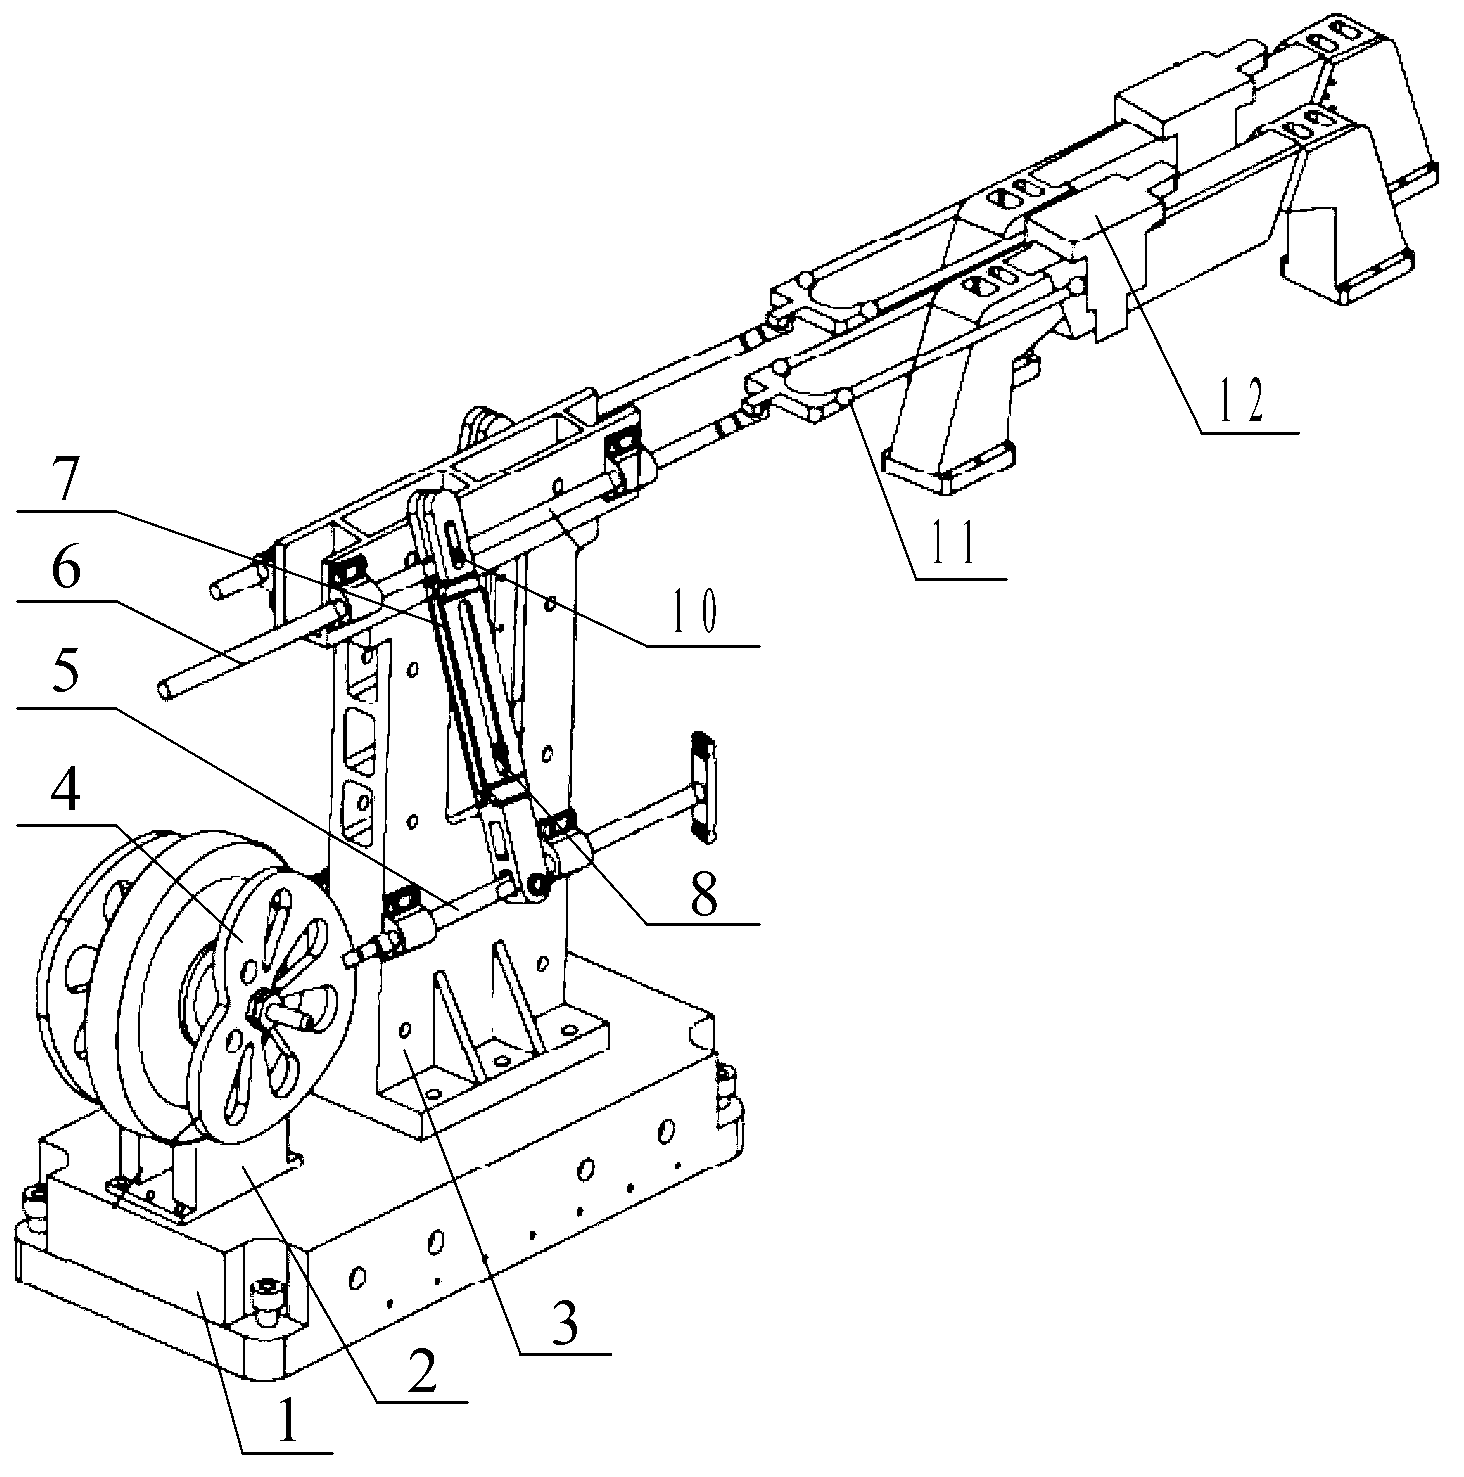 Cutter constant-speed device